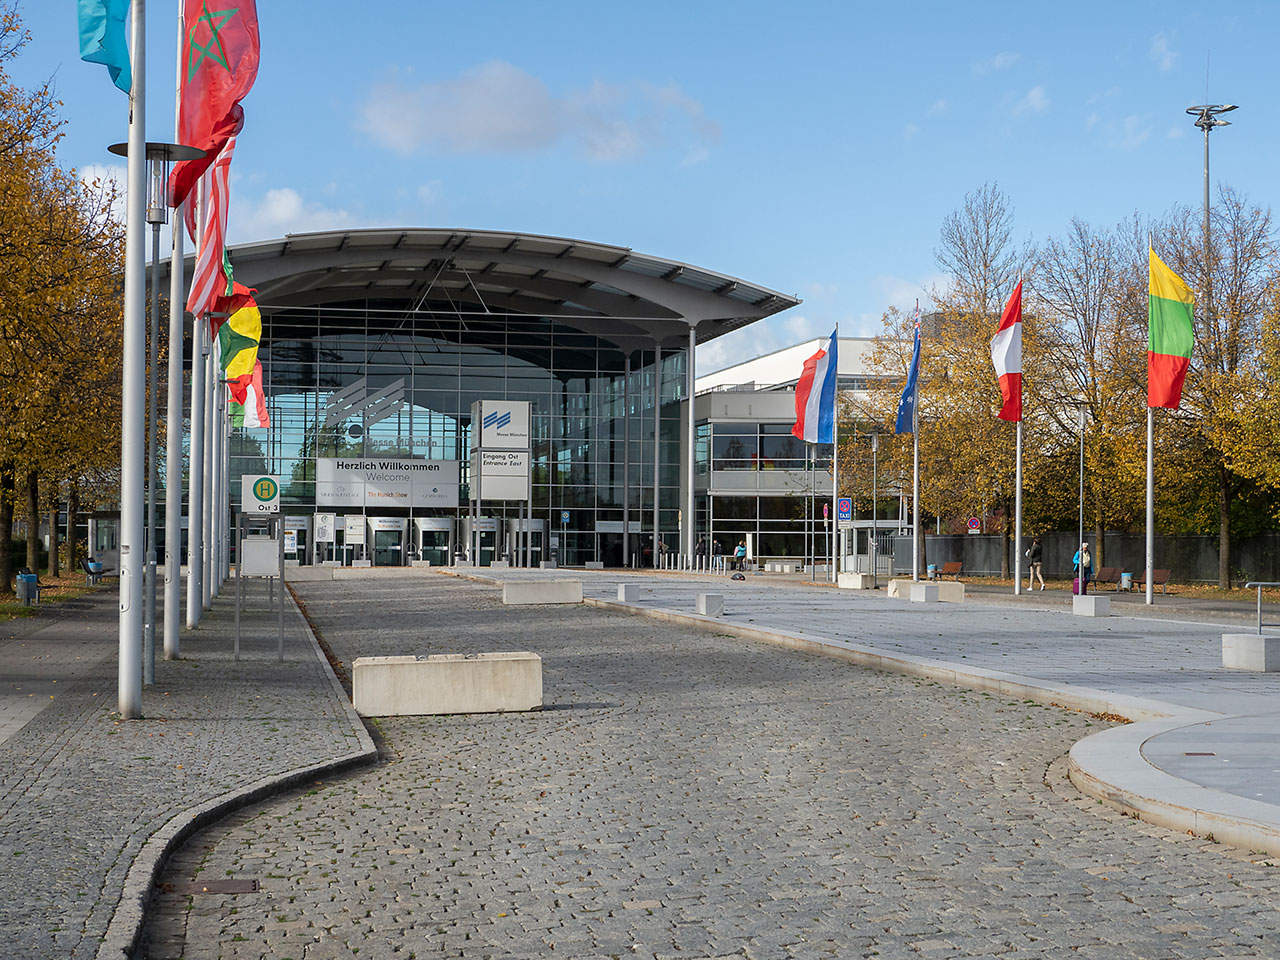 The entrance to the Munich show 2021